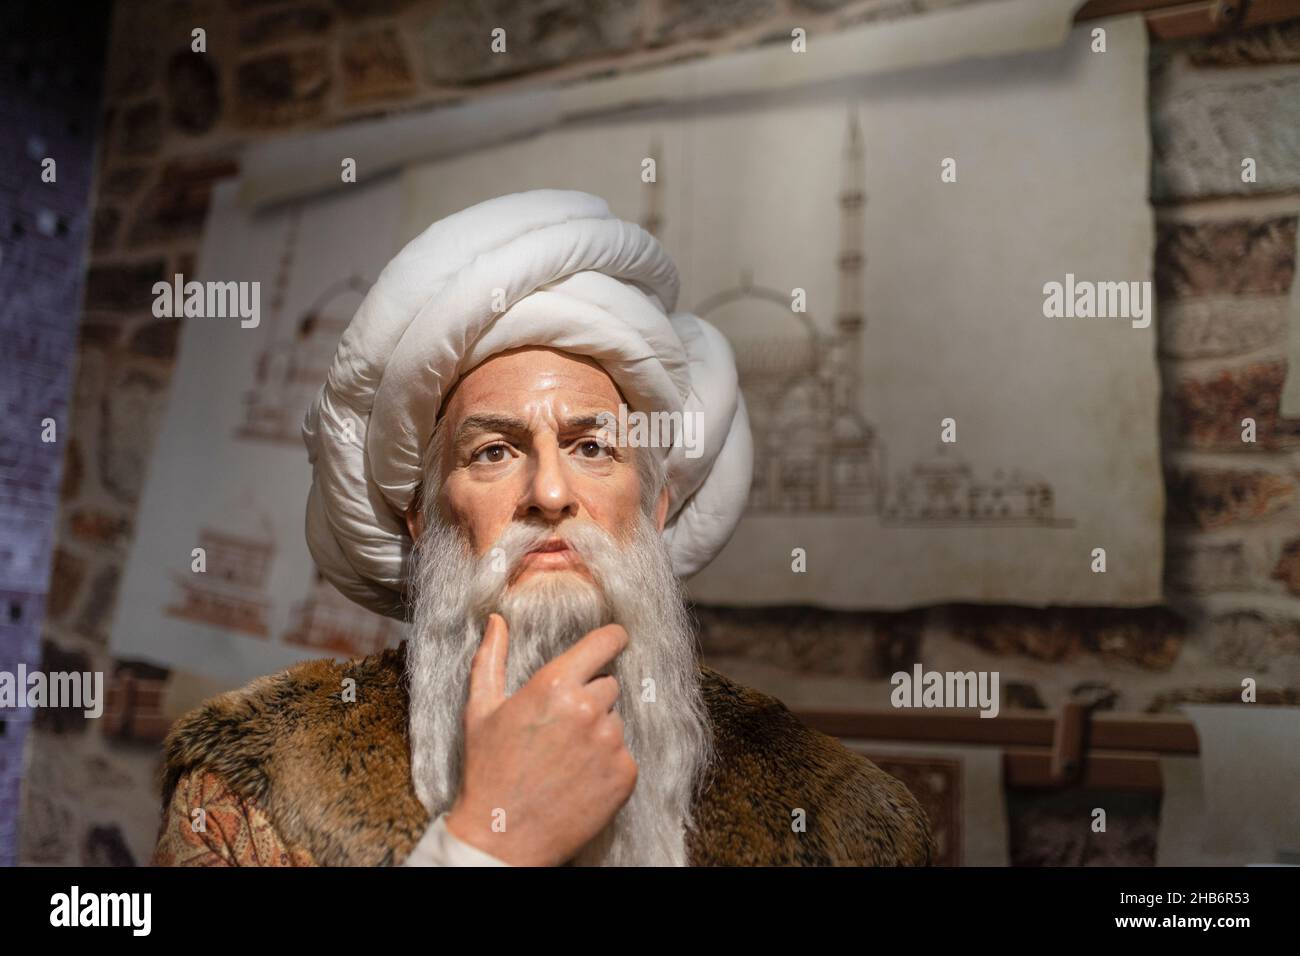 Mimar Sinan wax sculpture at Madame Tussauds Istanbul. Mimar Sinan was the chief Ottoman architect and civil engineer in Ottoman Empire. Stock Photo